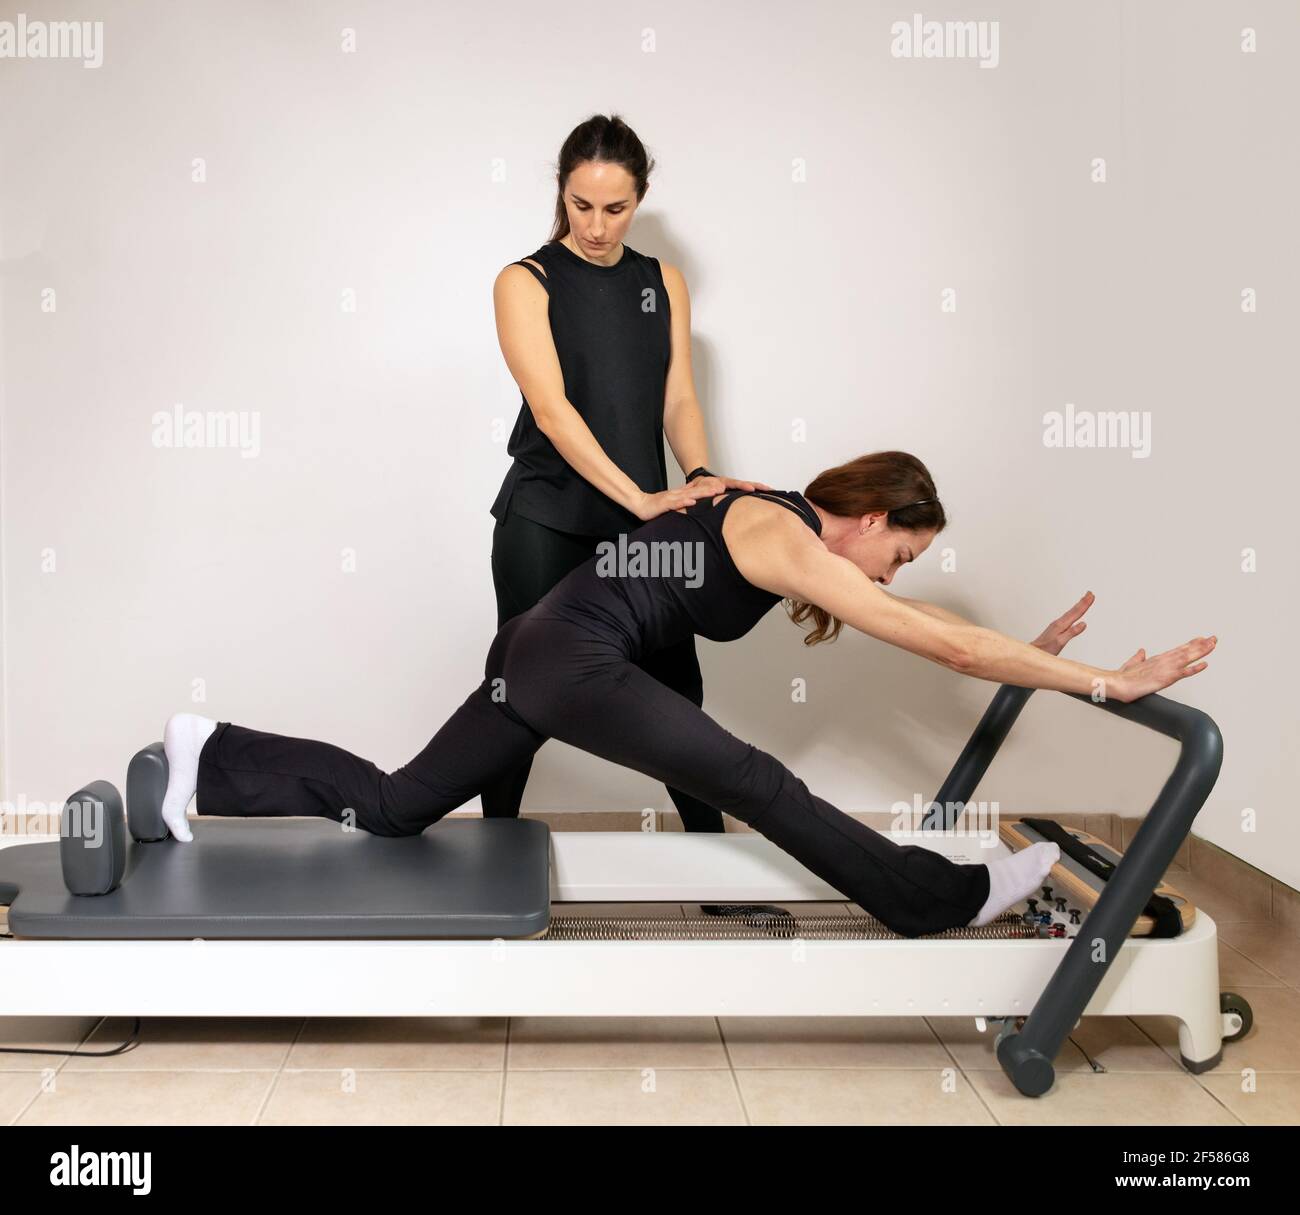 A woman practicing exercises with a pilates personal trainer. Stock Photo